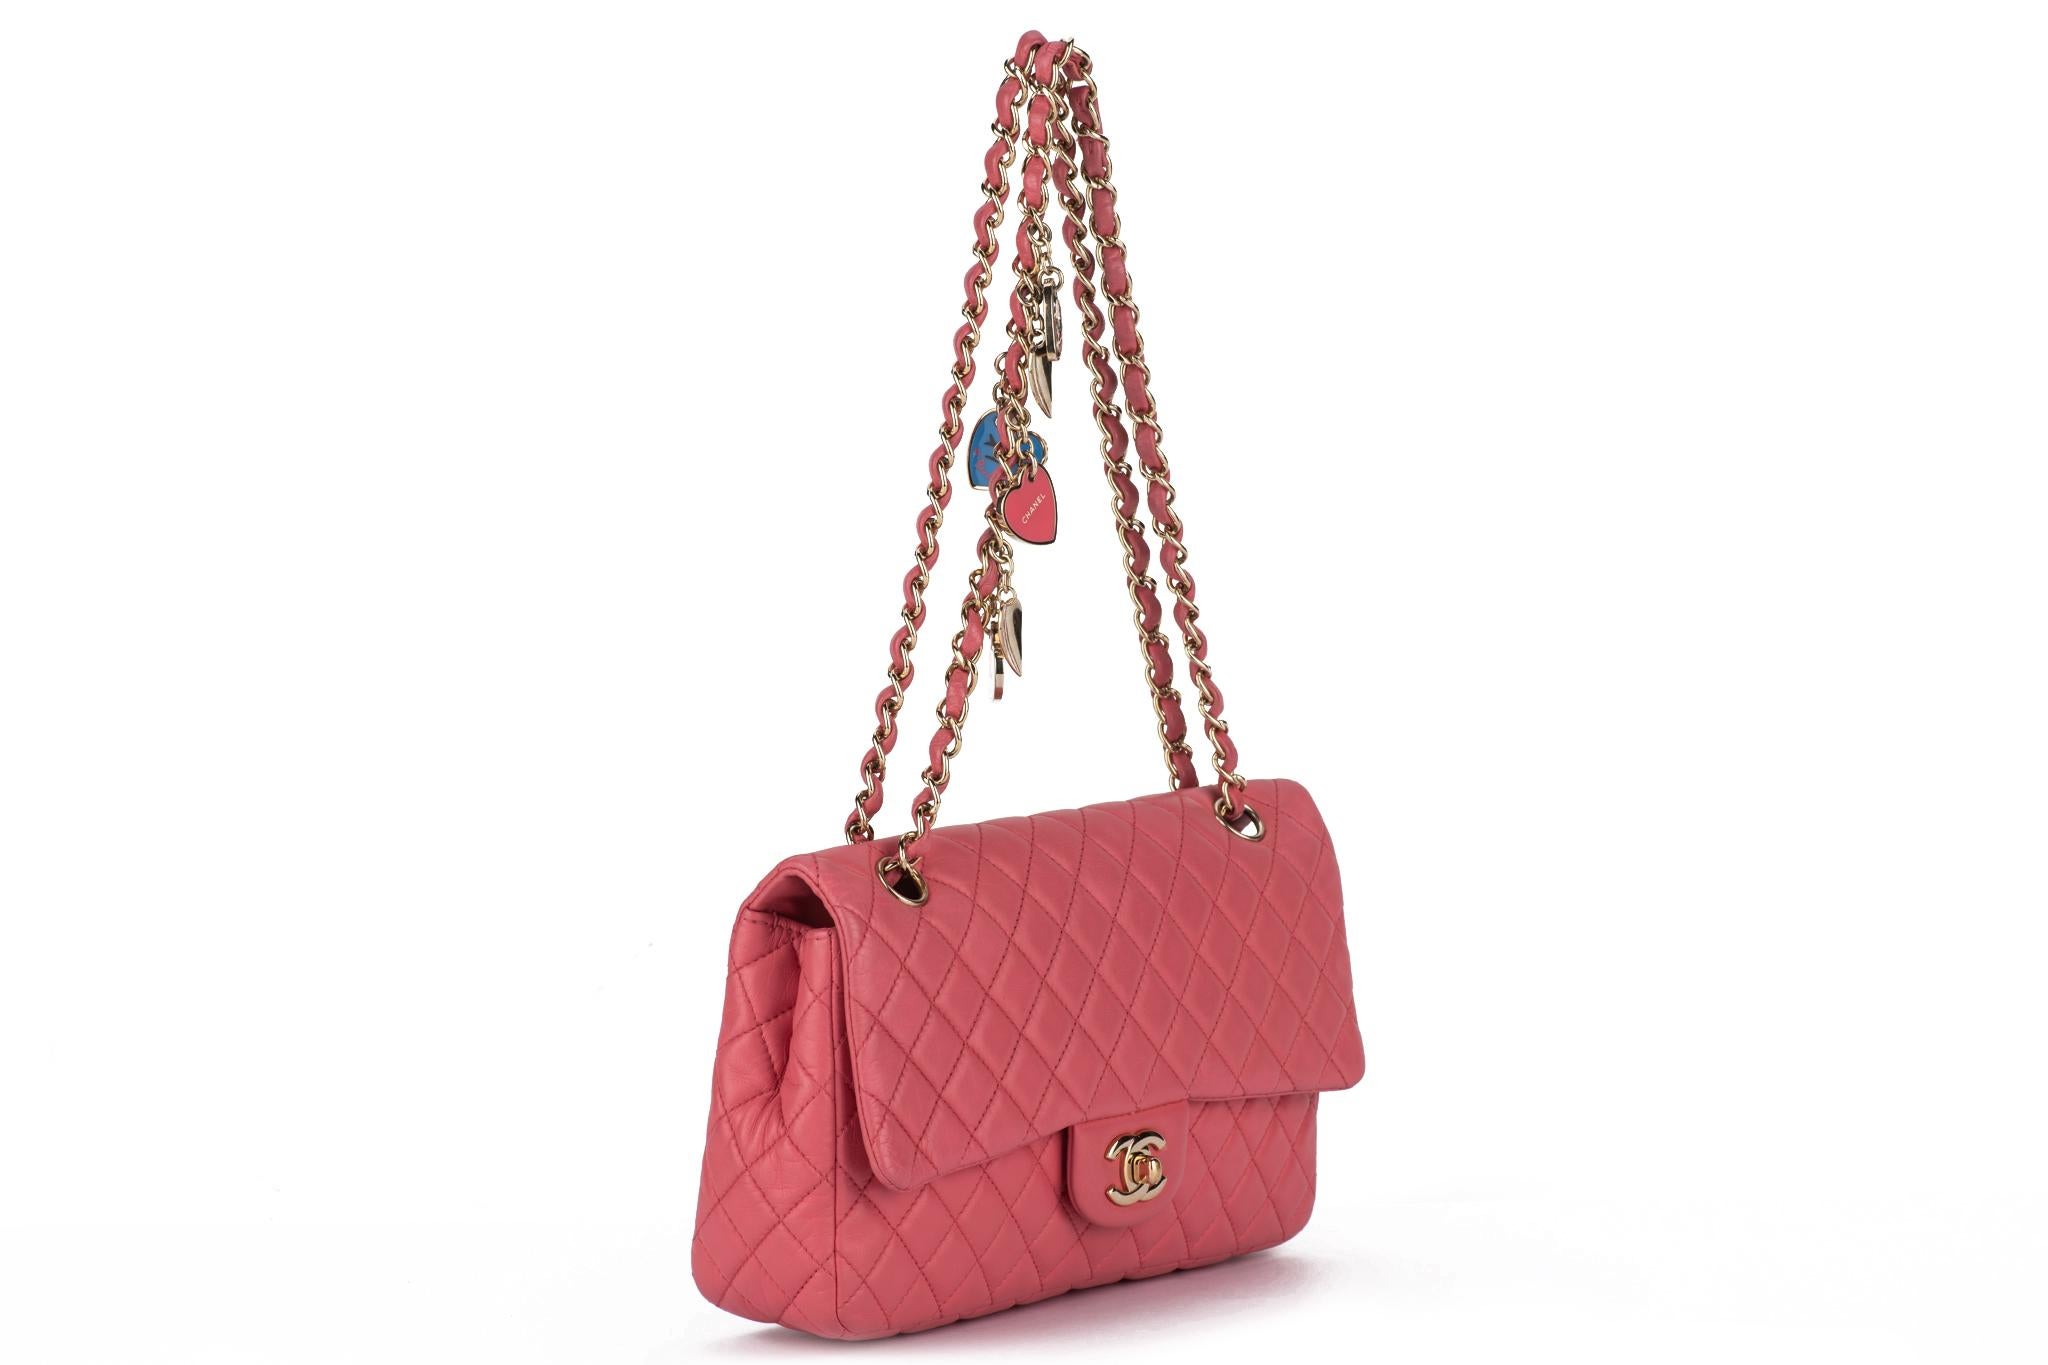 The Chanel Camellia charm classic single flap shoulder bag features a pink lambskin and a charmed chain. The bag features a leather-threaded polished gold chain-link shoulder strap, a rear patch pocket, and a matching gold classic CC turn-lock. An